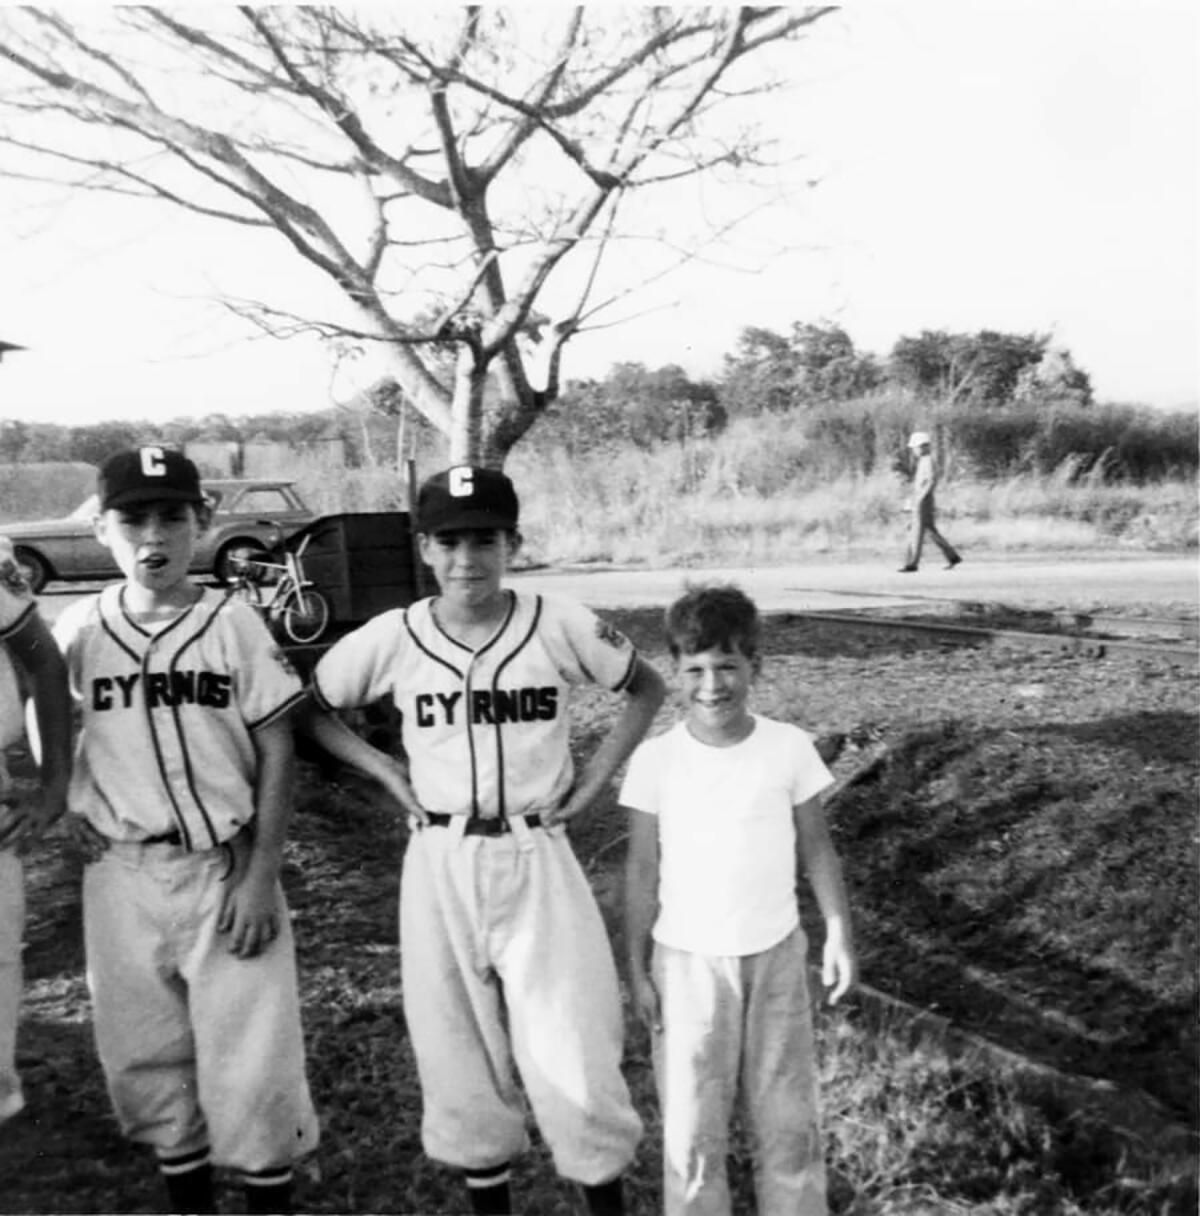 Three boys, two in baseball uniforms, smile in a black-and-white photo.